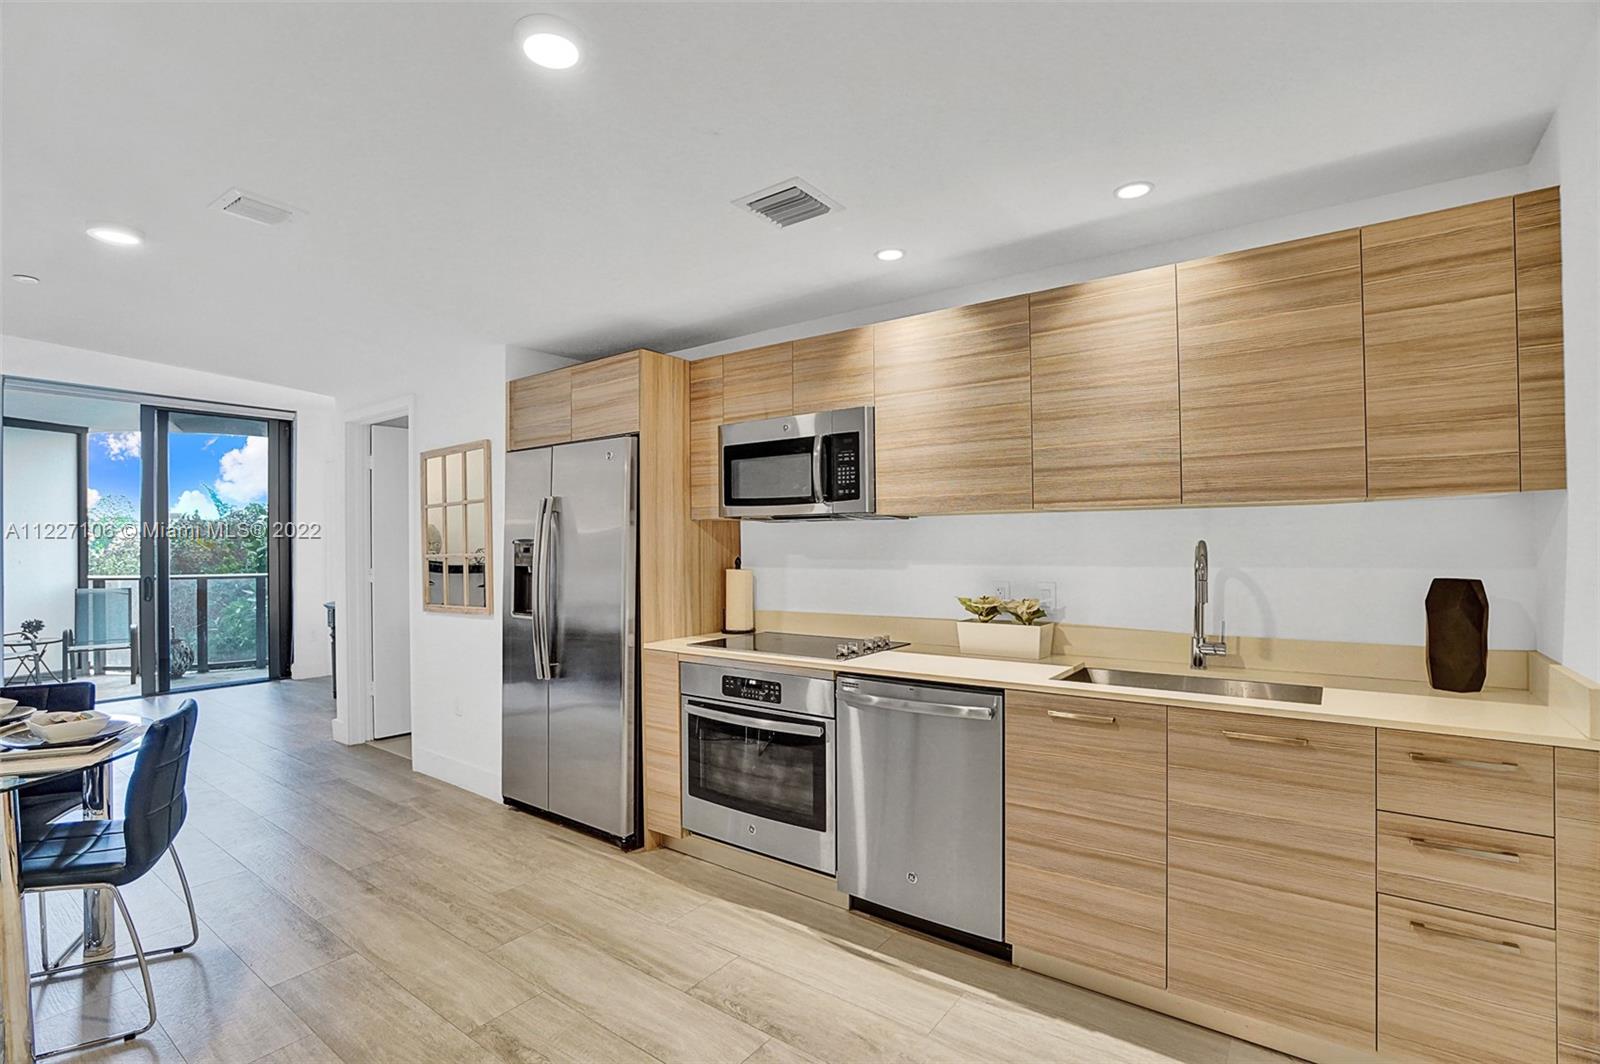 a kitchen with a sink stainless steel appliances wooden floor and cabinets